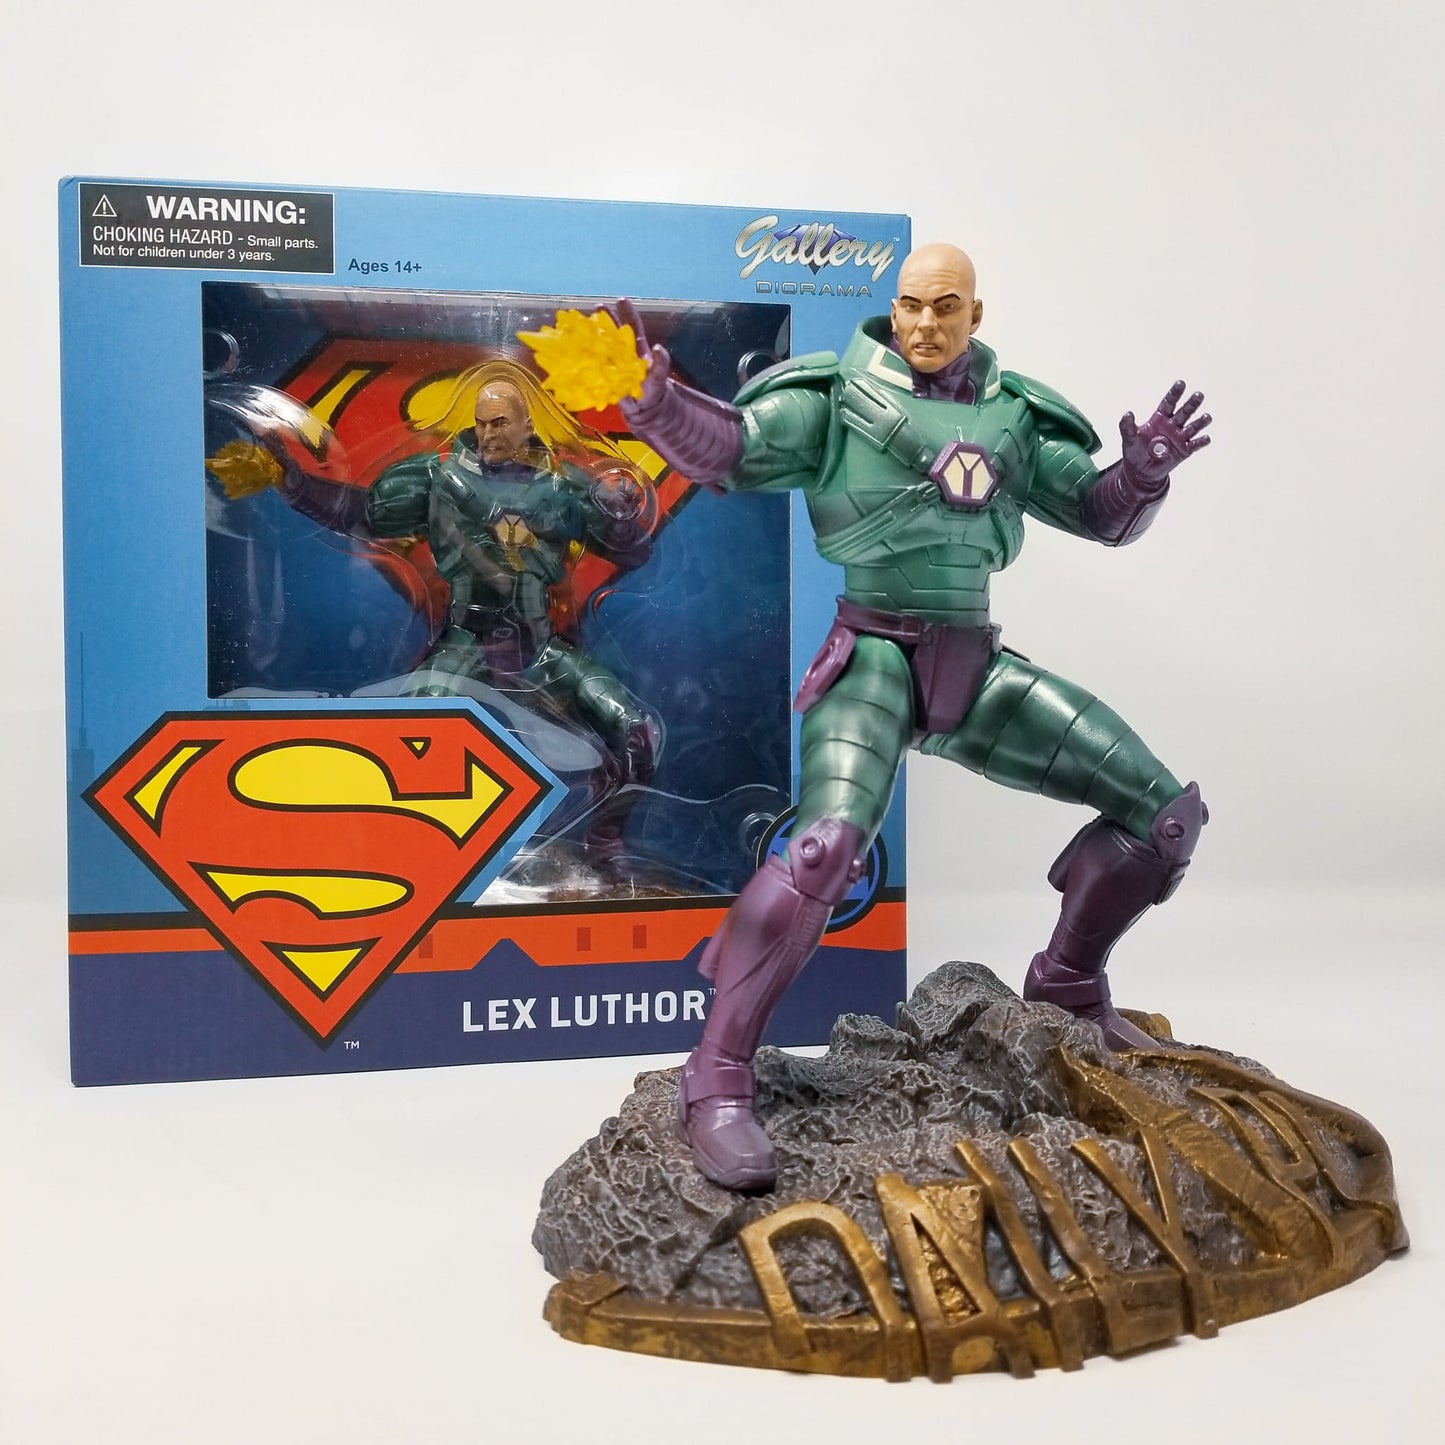 Lex Luthor DC Gallery Statue Destroy Superman!  A Diamond Select Toys release! Lex Luthor dons his powerful armor to take on Superman in this DC Comics-inspired Gallery Diorama!  Raising his hand to fire a Kryptonite-fueled blast, this Lex Luthor sculpture measures approximately 9 inches tall.